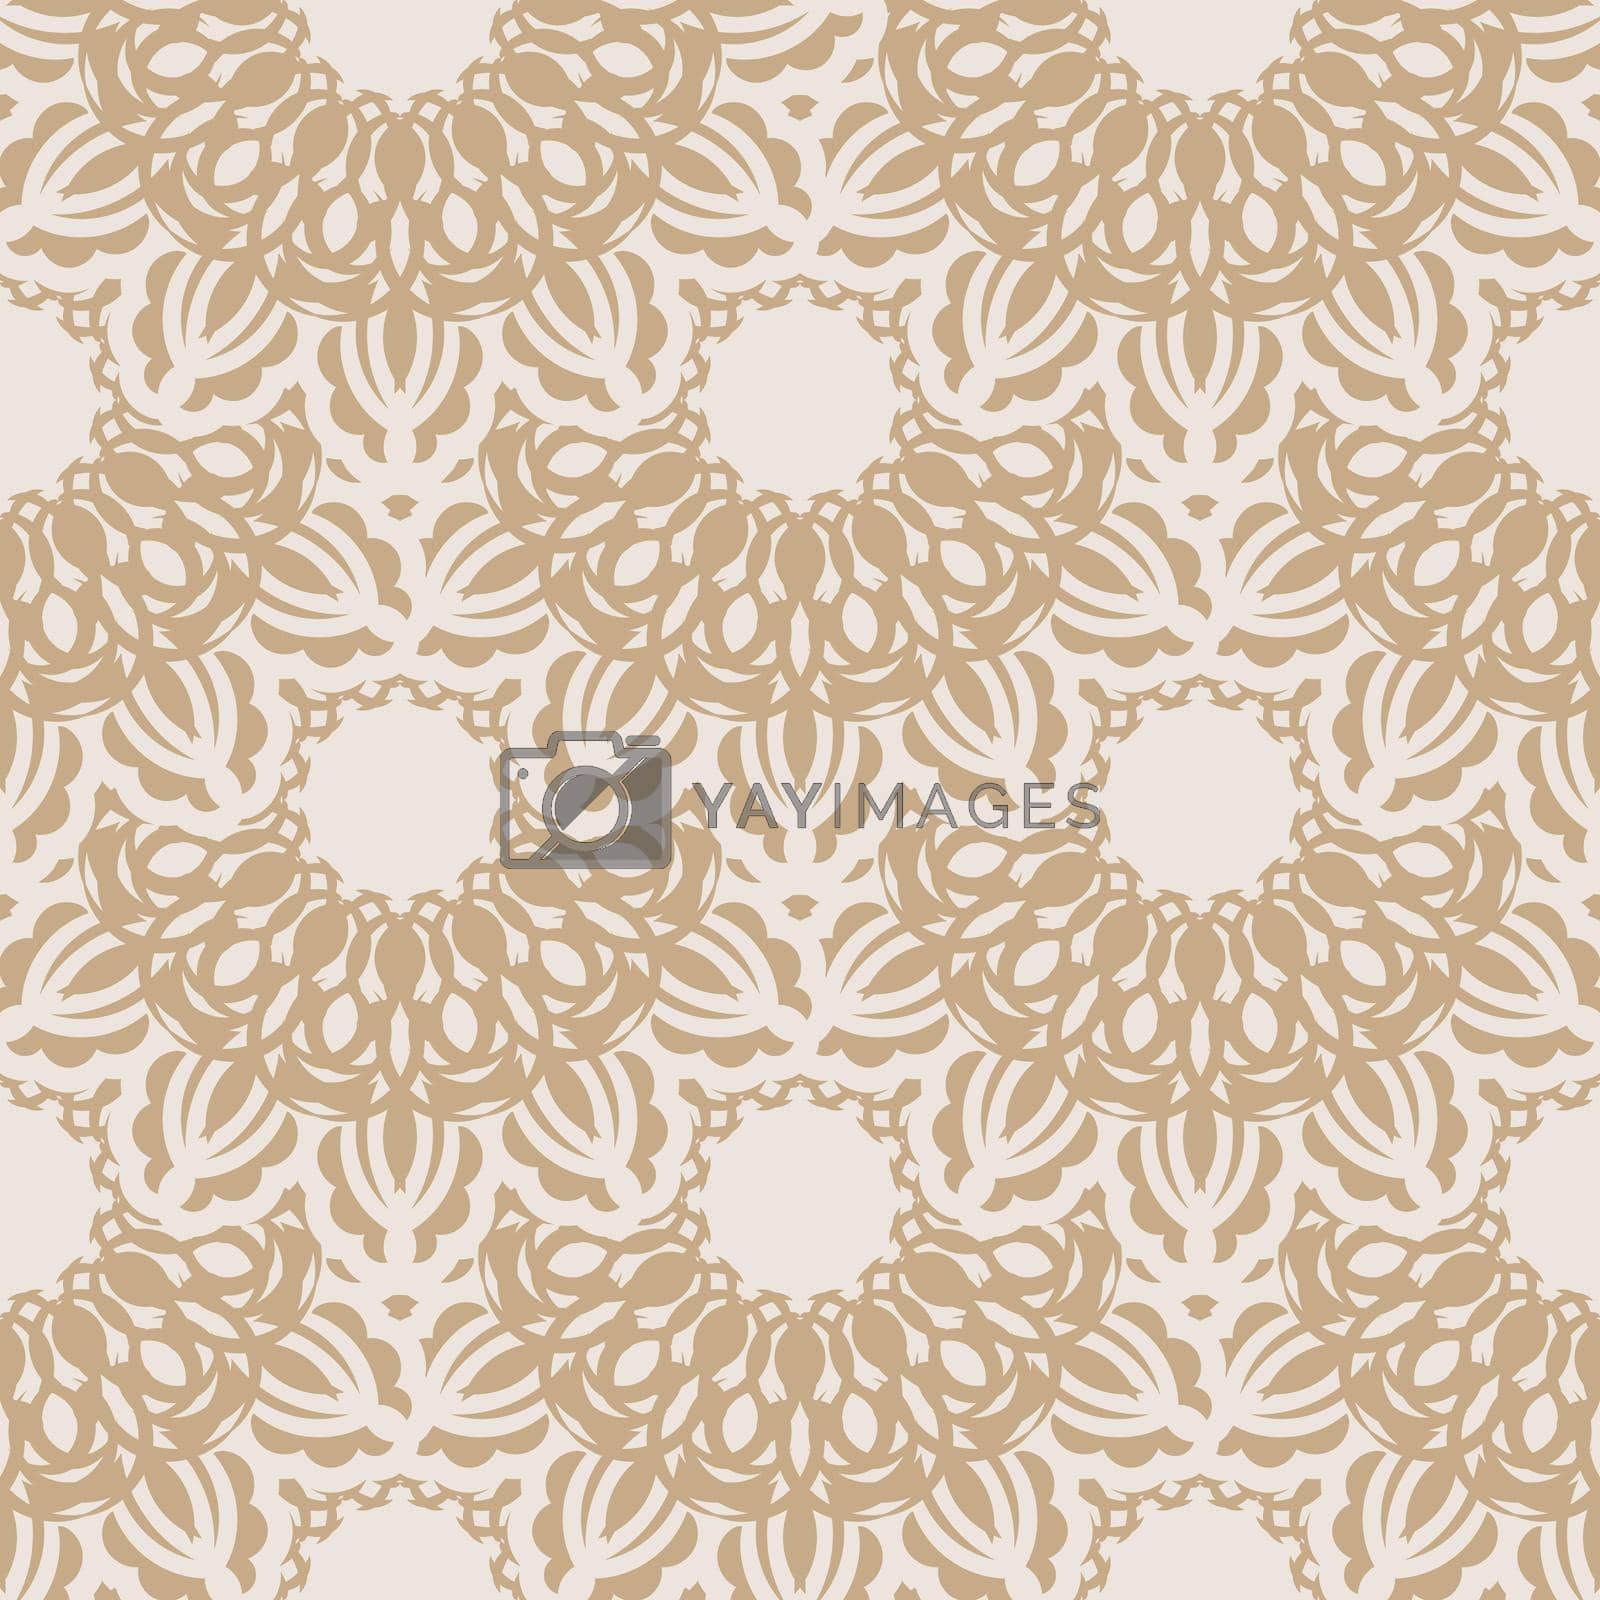 Beige seamless pattern with decorative ornaments. Good for clothing, textiles, backgrounds and prints. Vector illustration.